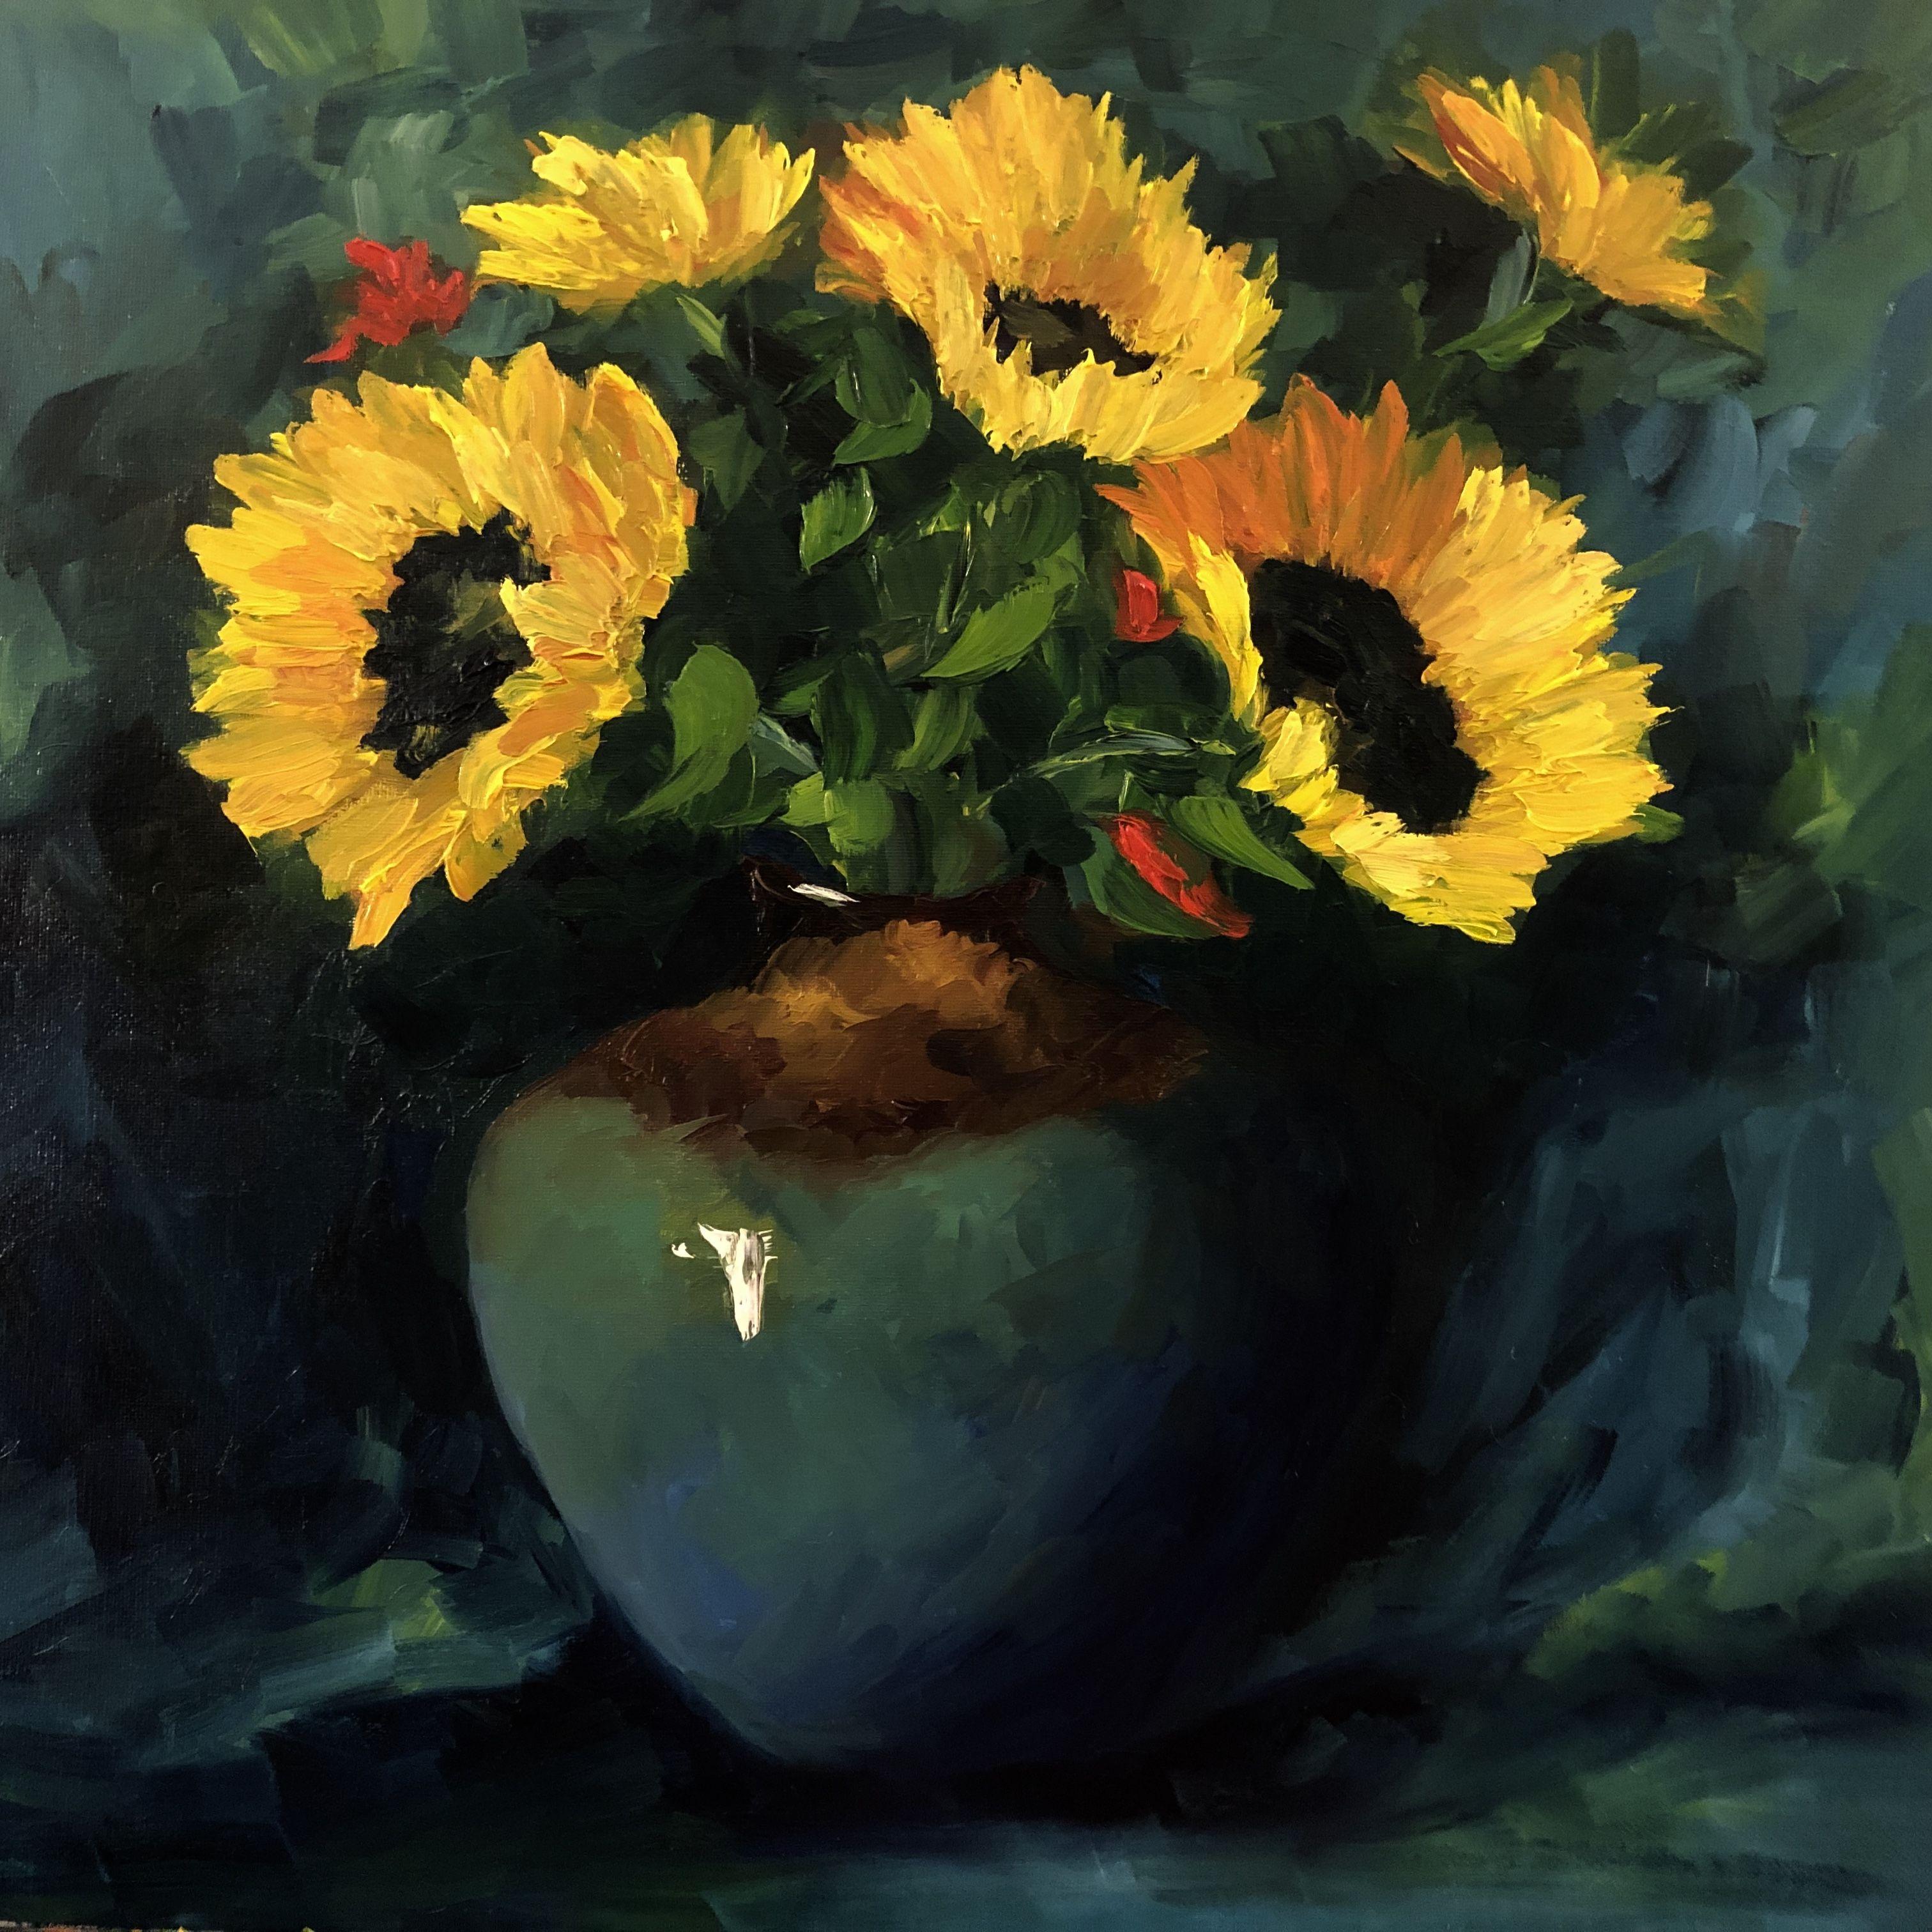 Sunflowers will bring cheer and brighten any room...   :: Painting :: Impressionist :: This piece comes with an official certificate of authenticity signed by the artist :: Ready to Hang: No :: Signed: No ::  :: Canvas :: Diagonal :: Original ::